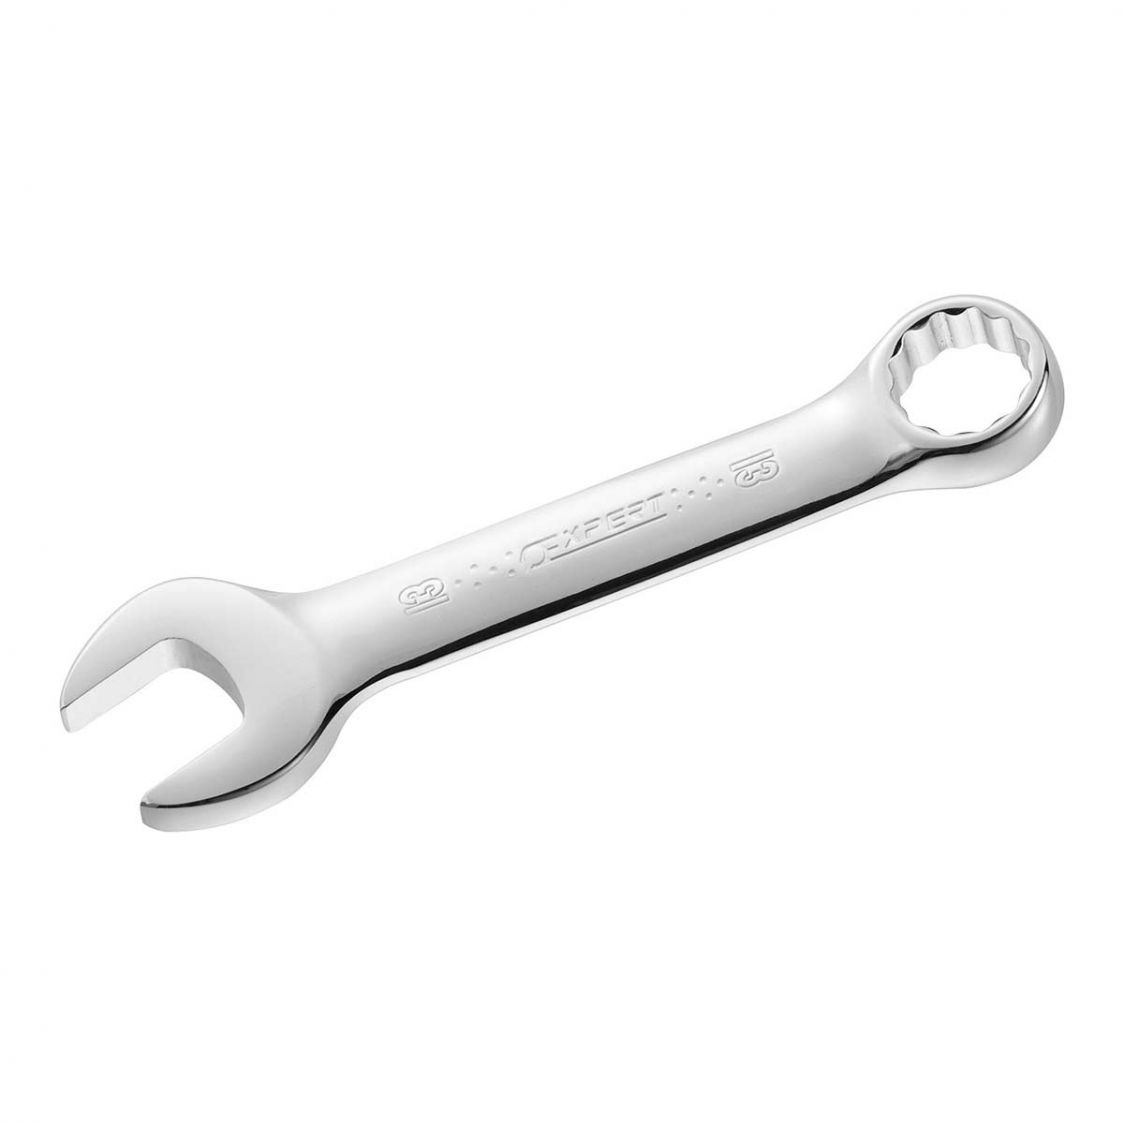 EXPERT by FACOM E110111 - 15mm Metric Stubby Combination Spanner